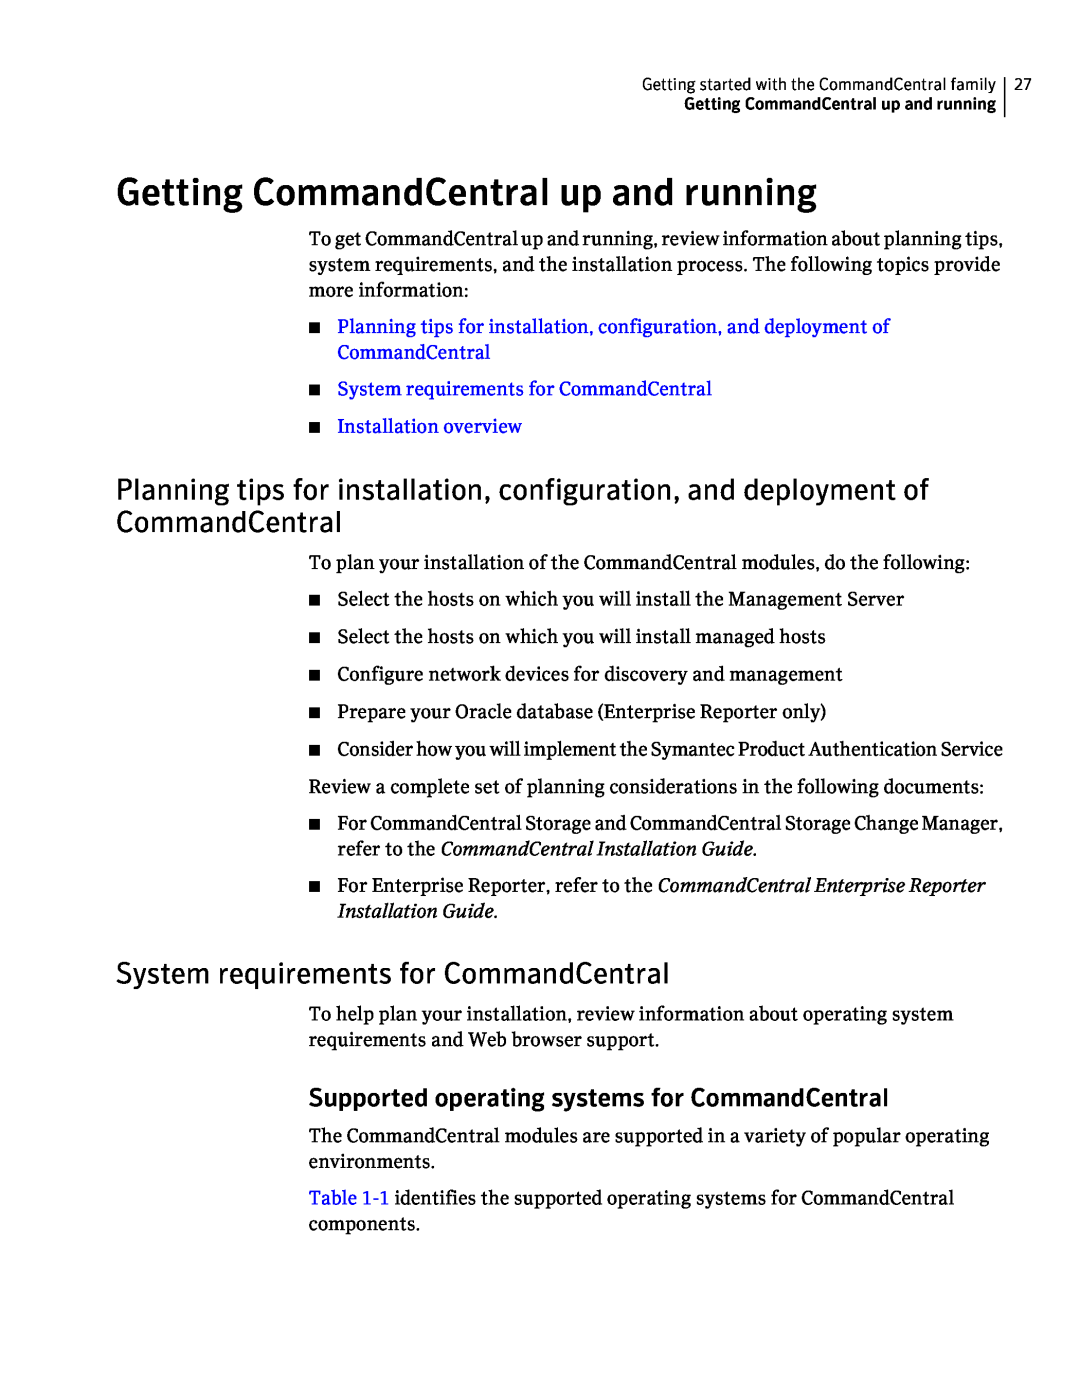 Symantec 5.1 manual Getting CommandCentral up and running, System requirements for CommandCentral 